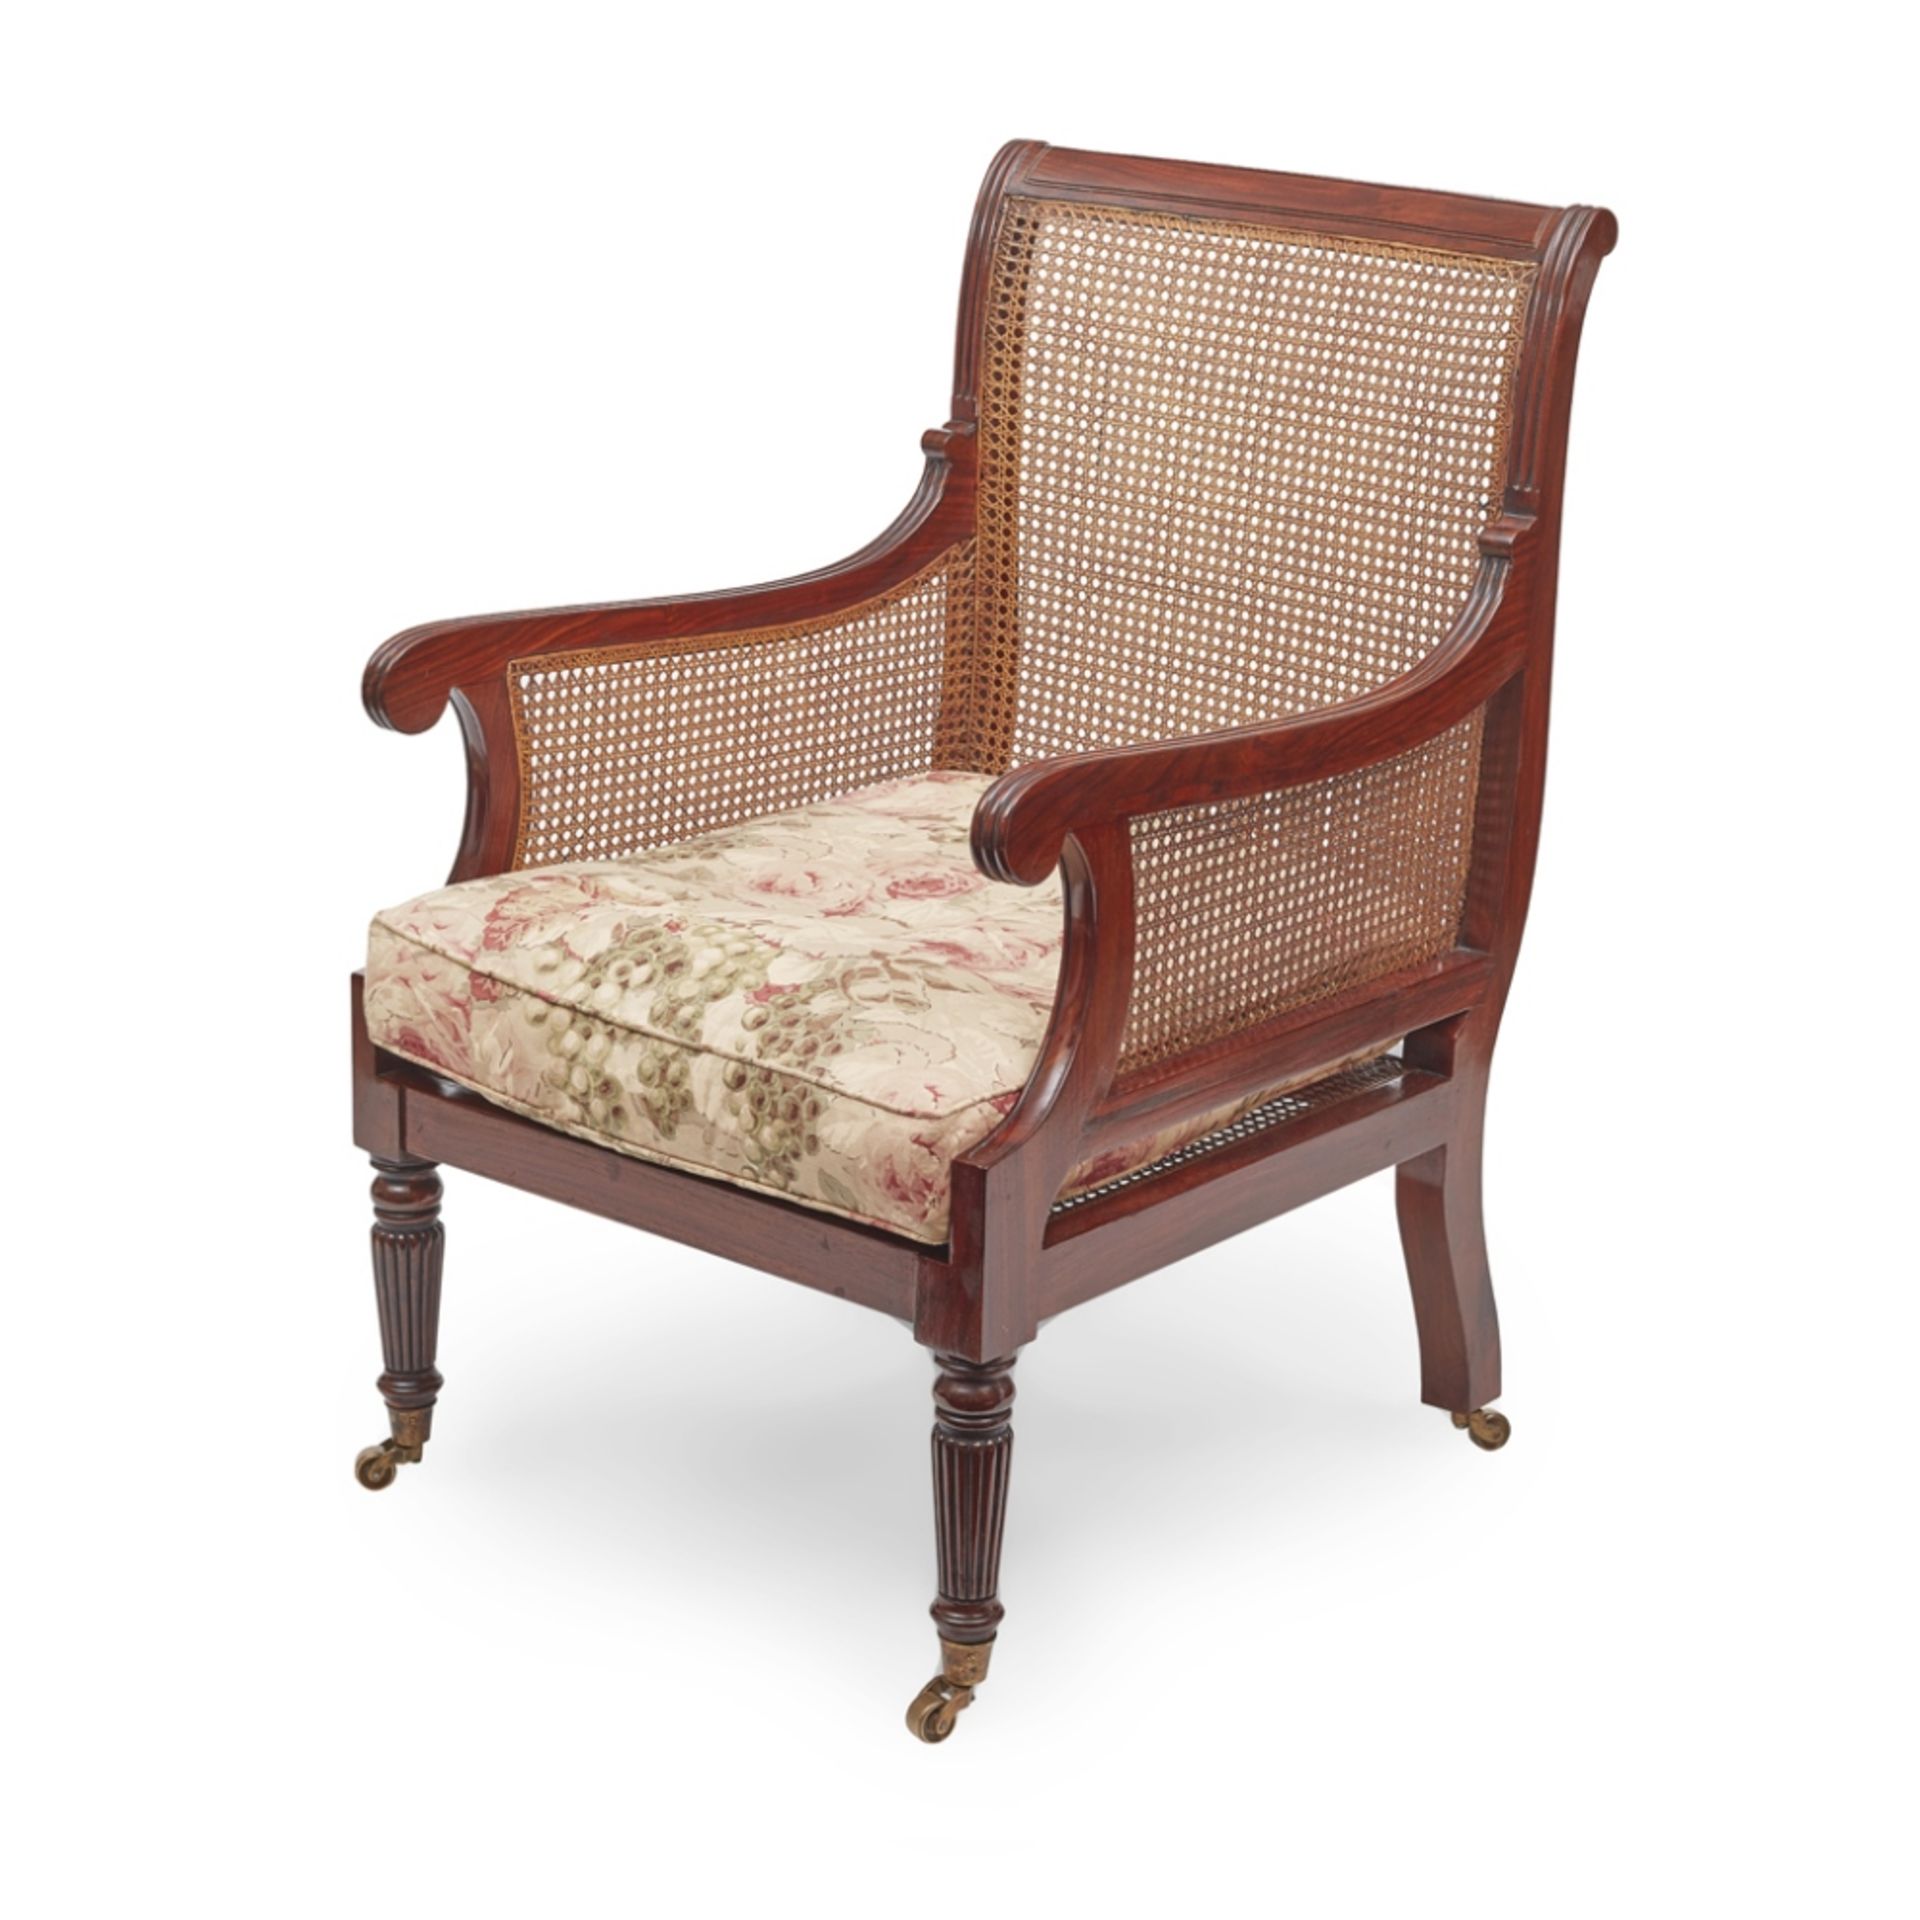 SIMON HORN, HAMPSHIRE REGENCY STYLE ROSEWOOD FRAMED BERGÈRE, MODERN the carved seatback with